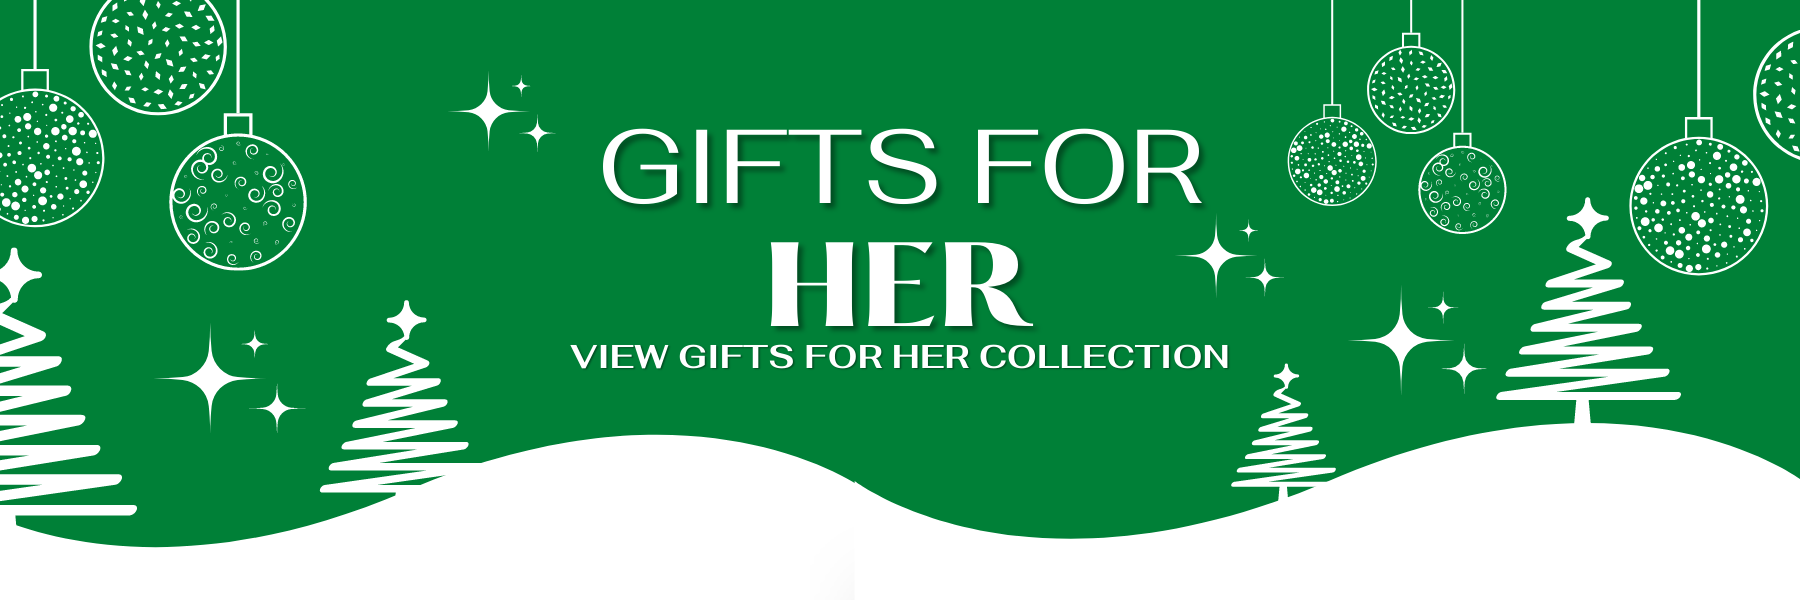 Hockey Gifts For Her